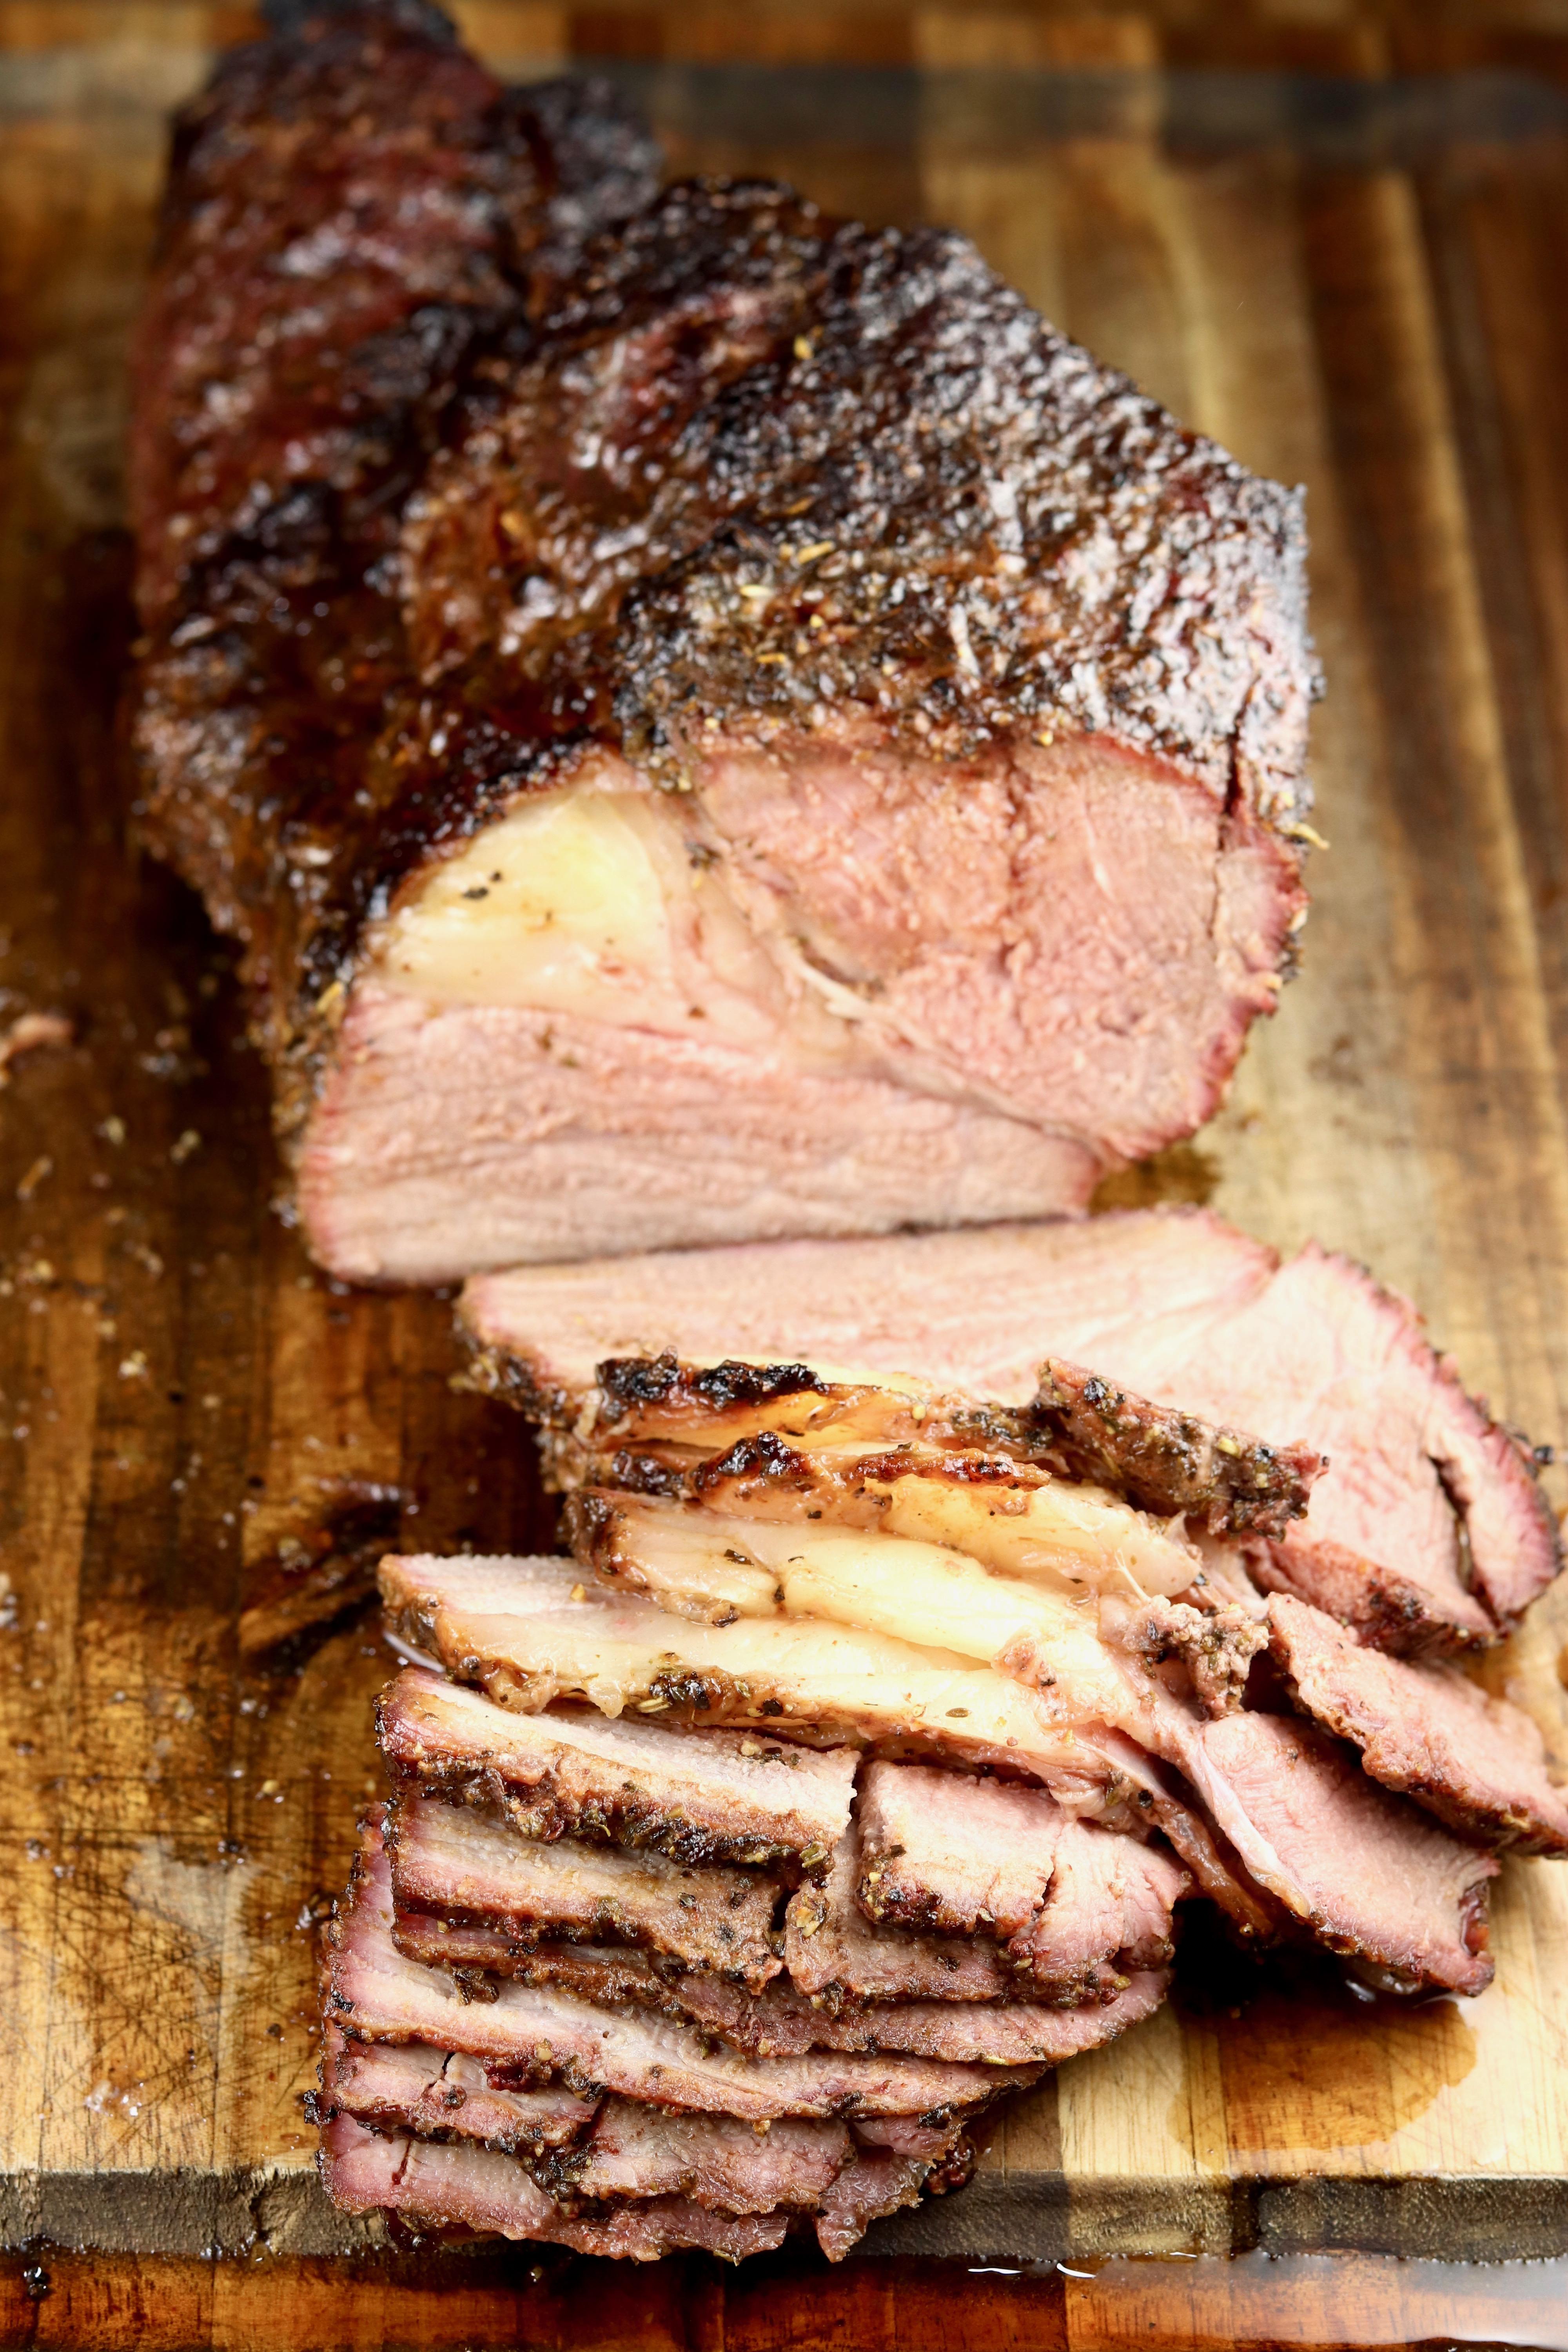 Pikes Peak Roast with a delicious dry rub is grilled with hickory smoke for a tasty main dish. Slice this roast thin for the best roast beef sandwiches to enjoy all week long.